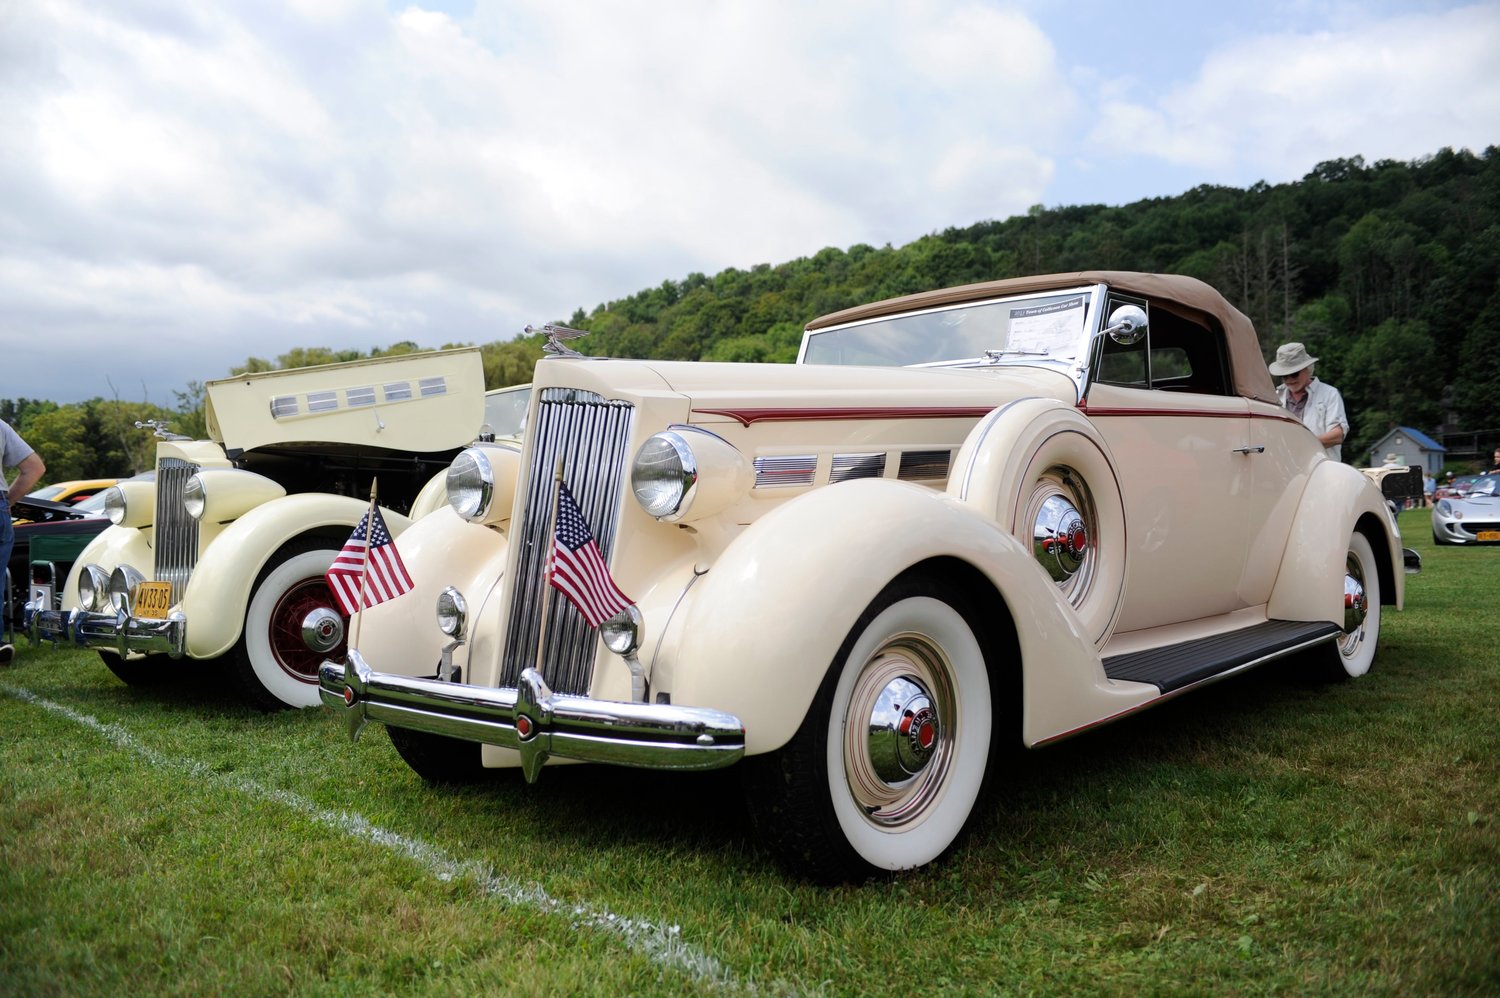 Pristine Packard.  Tom Flynn’s 1937 Packard 120 roadster was a showstopper. It took top honors in “Antique Car (Pre-1939)”..